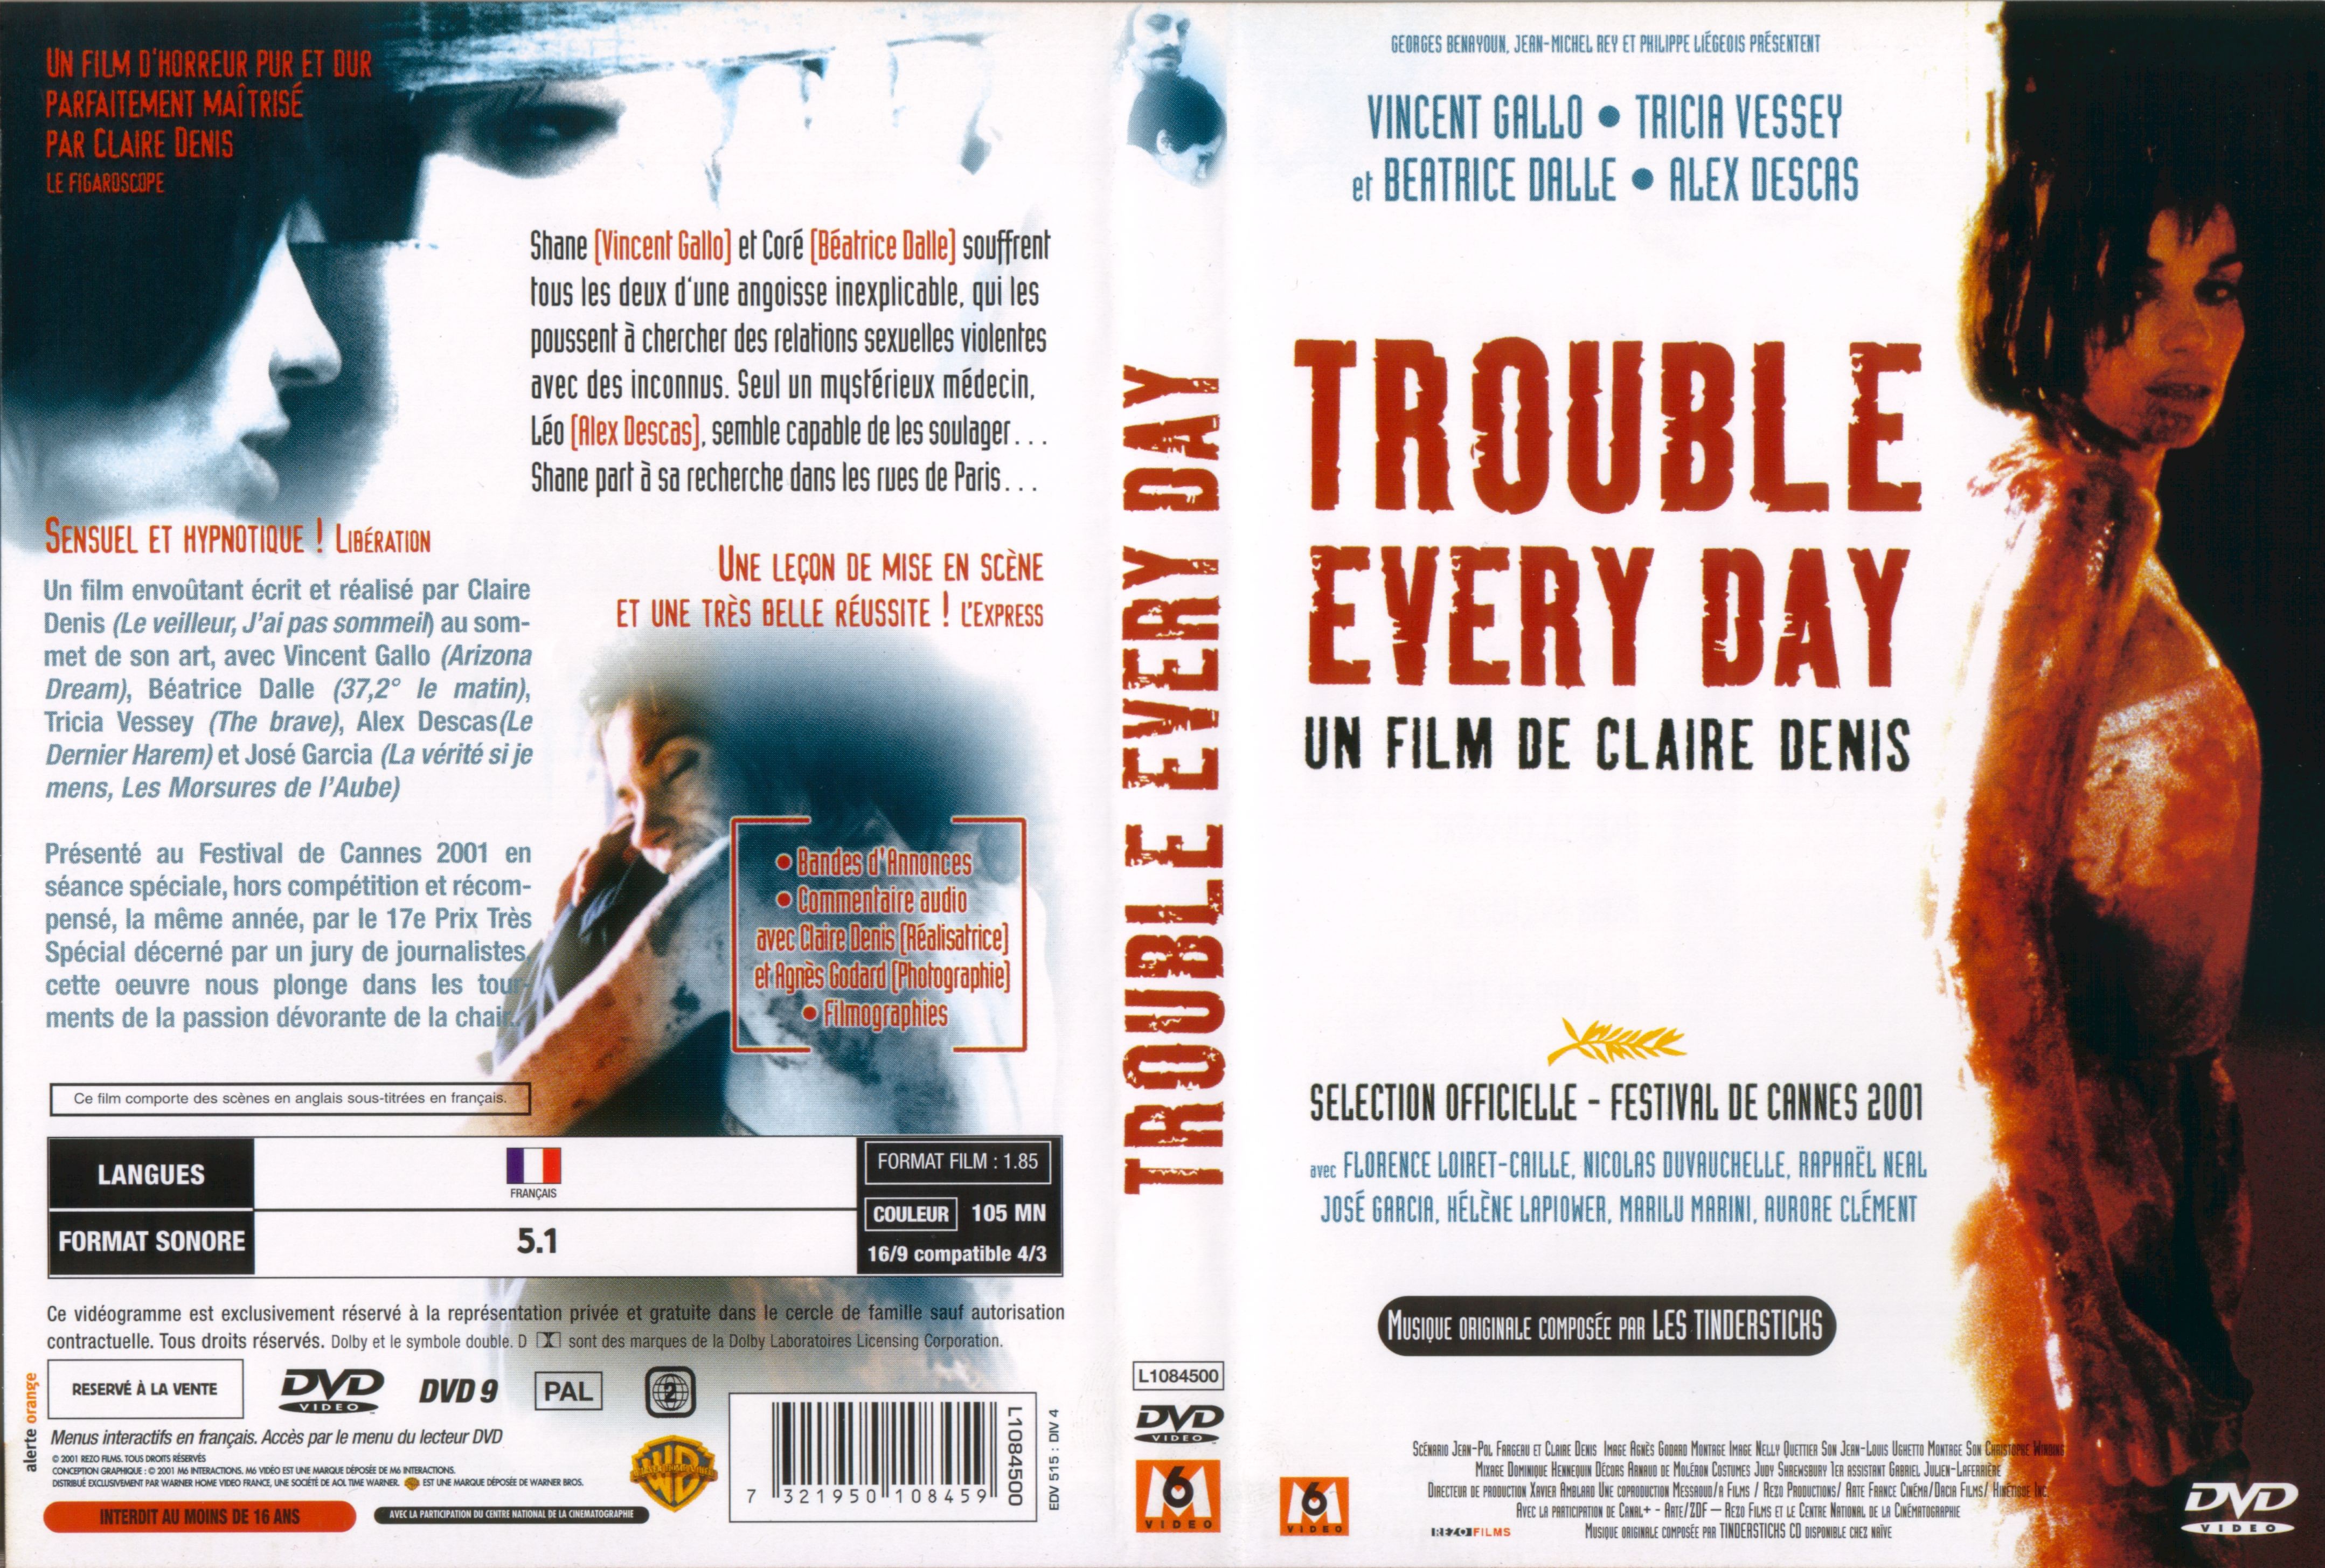 Jaquette DVD Trouble Every Day